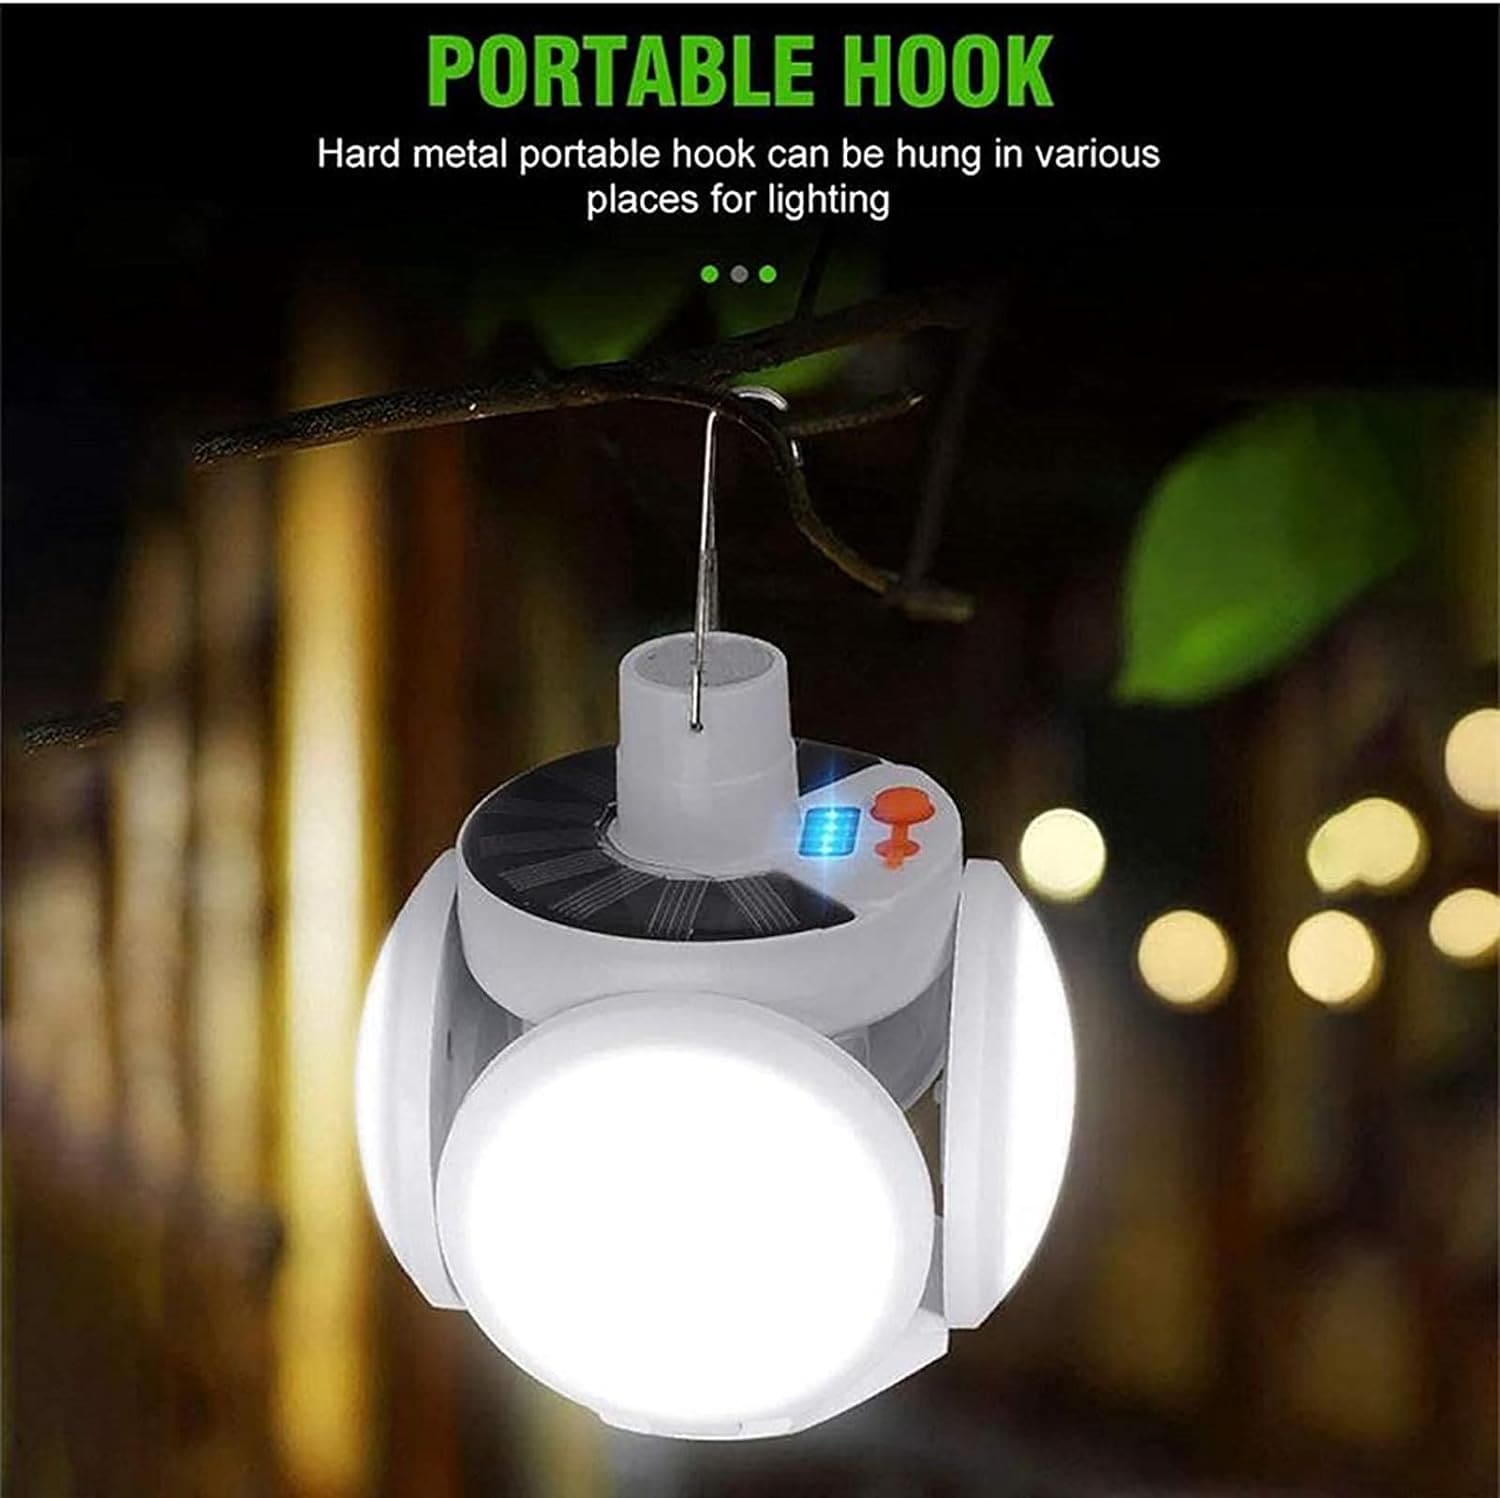 Football Foldable Solar Light, Emergency Home Camping Night Lights, Portable USB Rechargeable LED Search Light, 2 In 1 Camping Light, Portable Tent Lamp with Hanging Hook